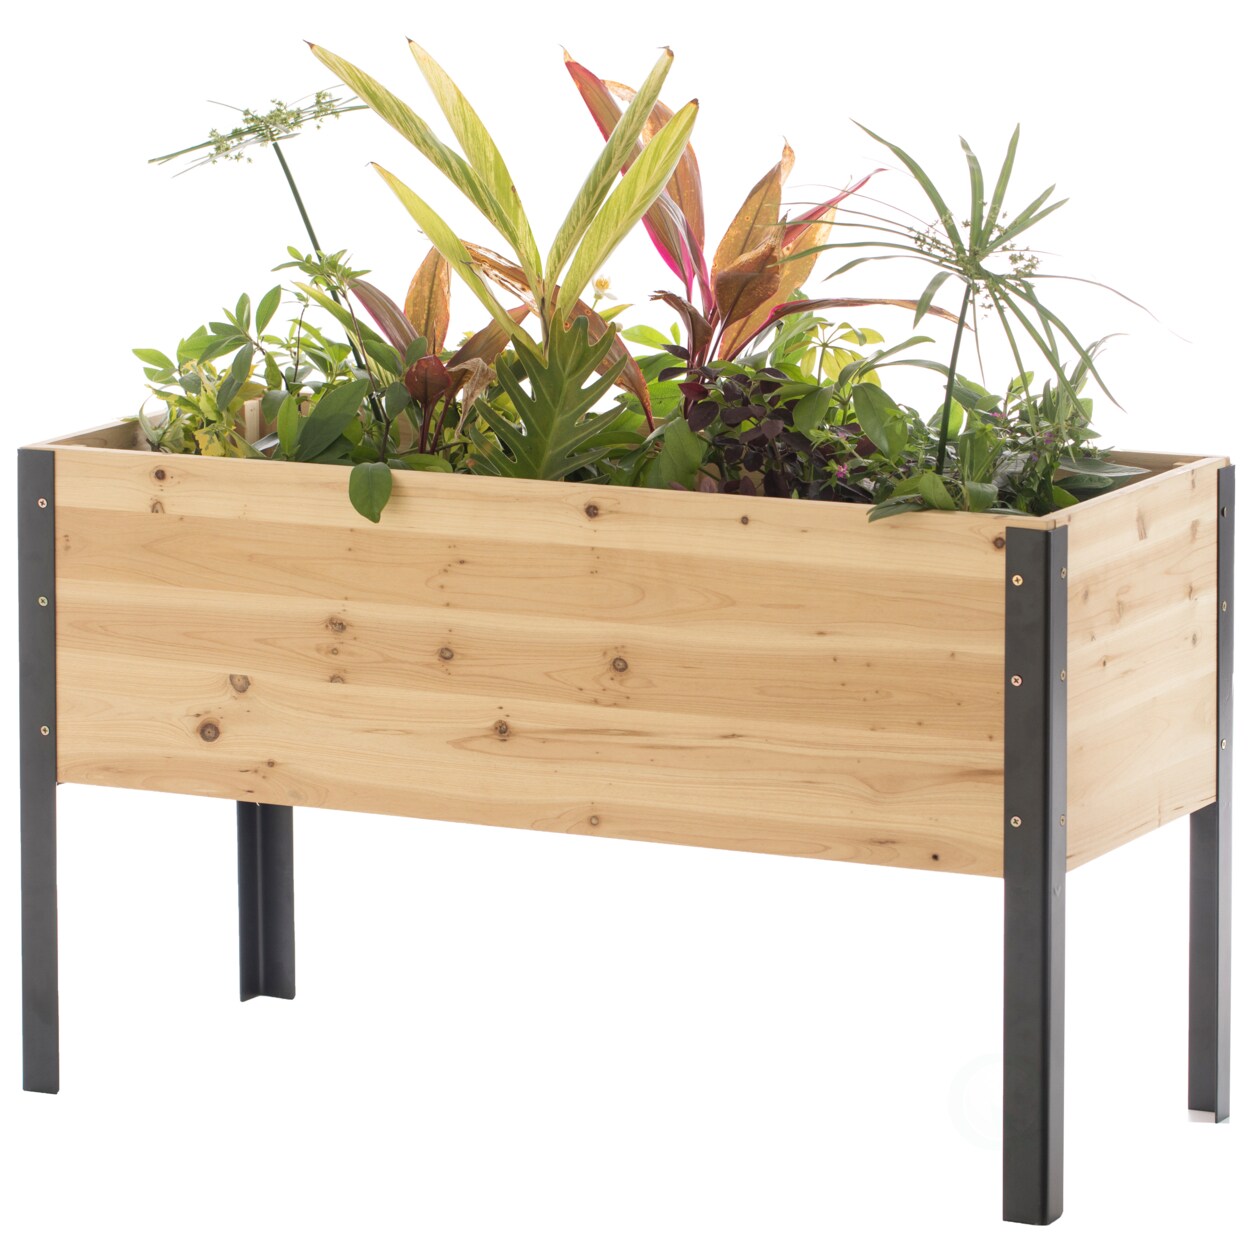 Gardenised Elevated Outdoor Raised Rectangular Planter Bed Box Solid Wood with Steel Legs Natural